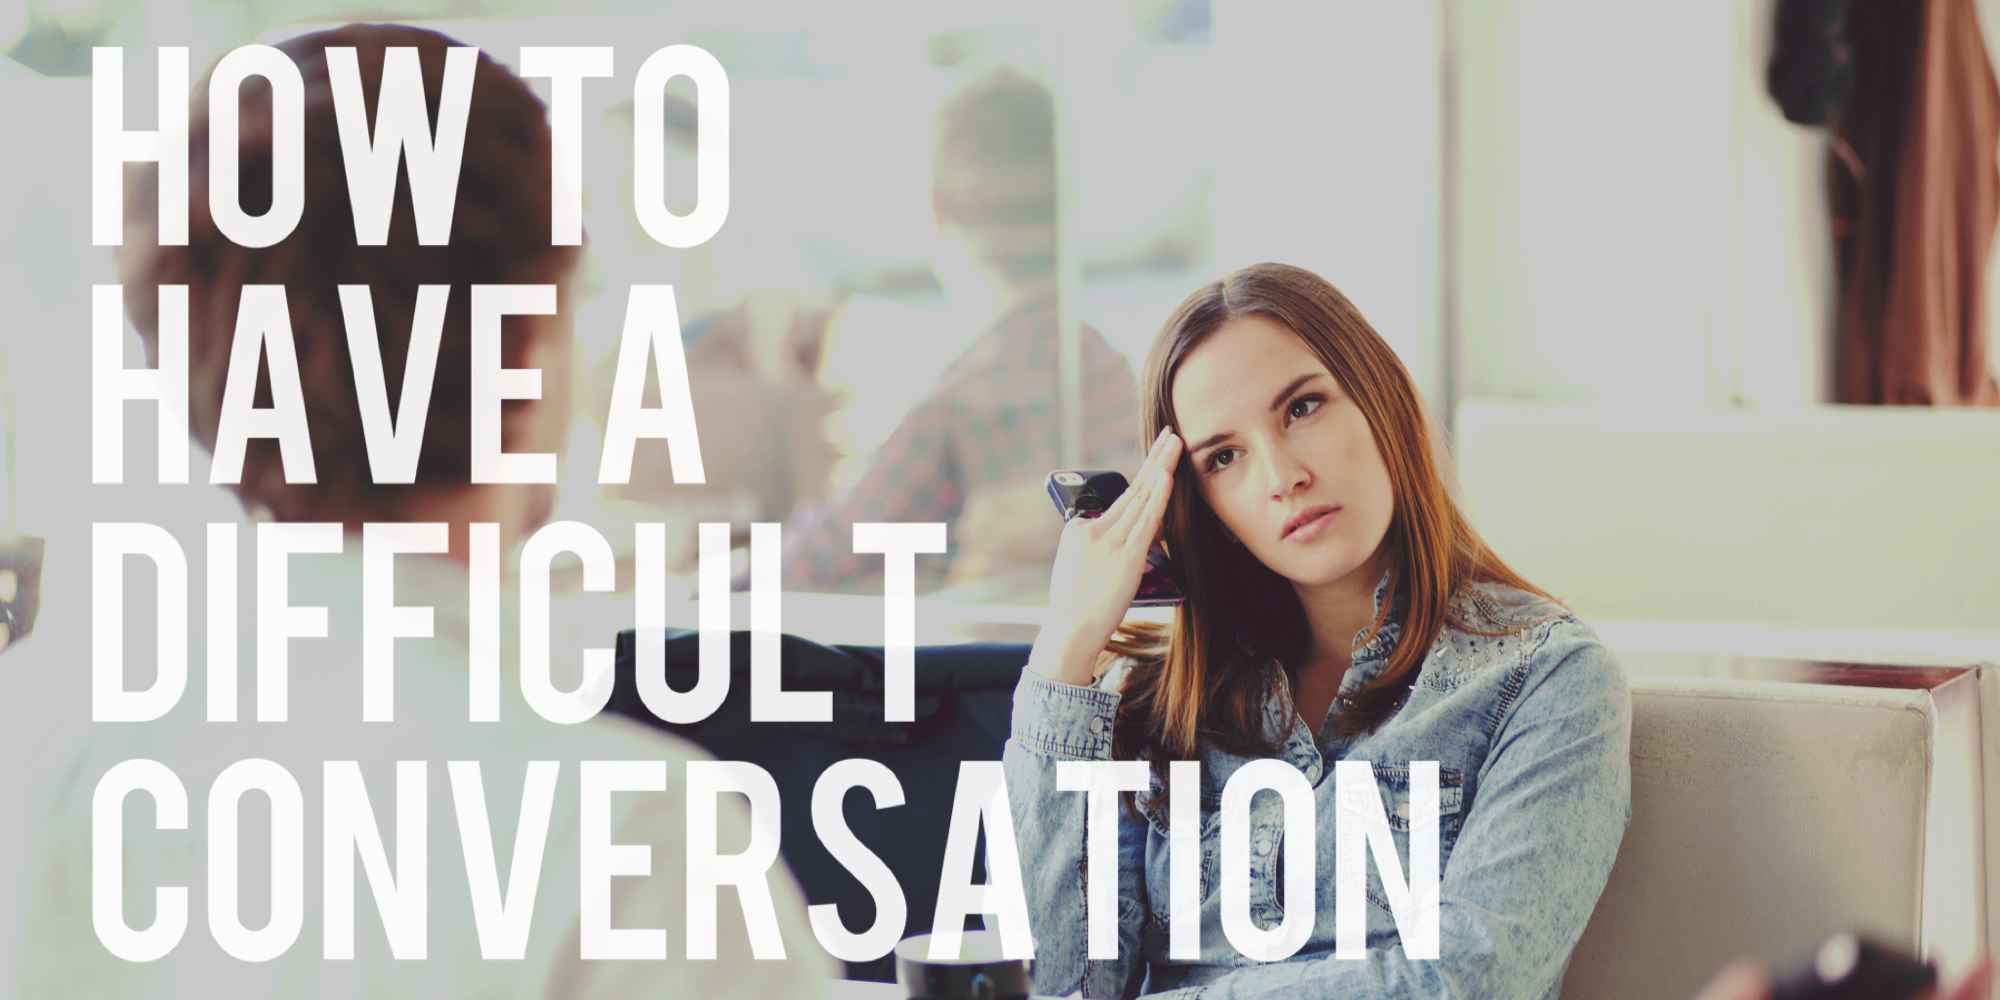 difficult-conversation-4-tips